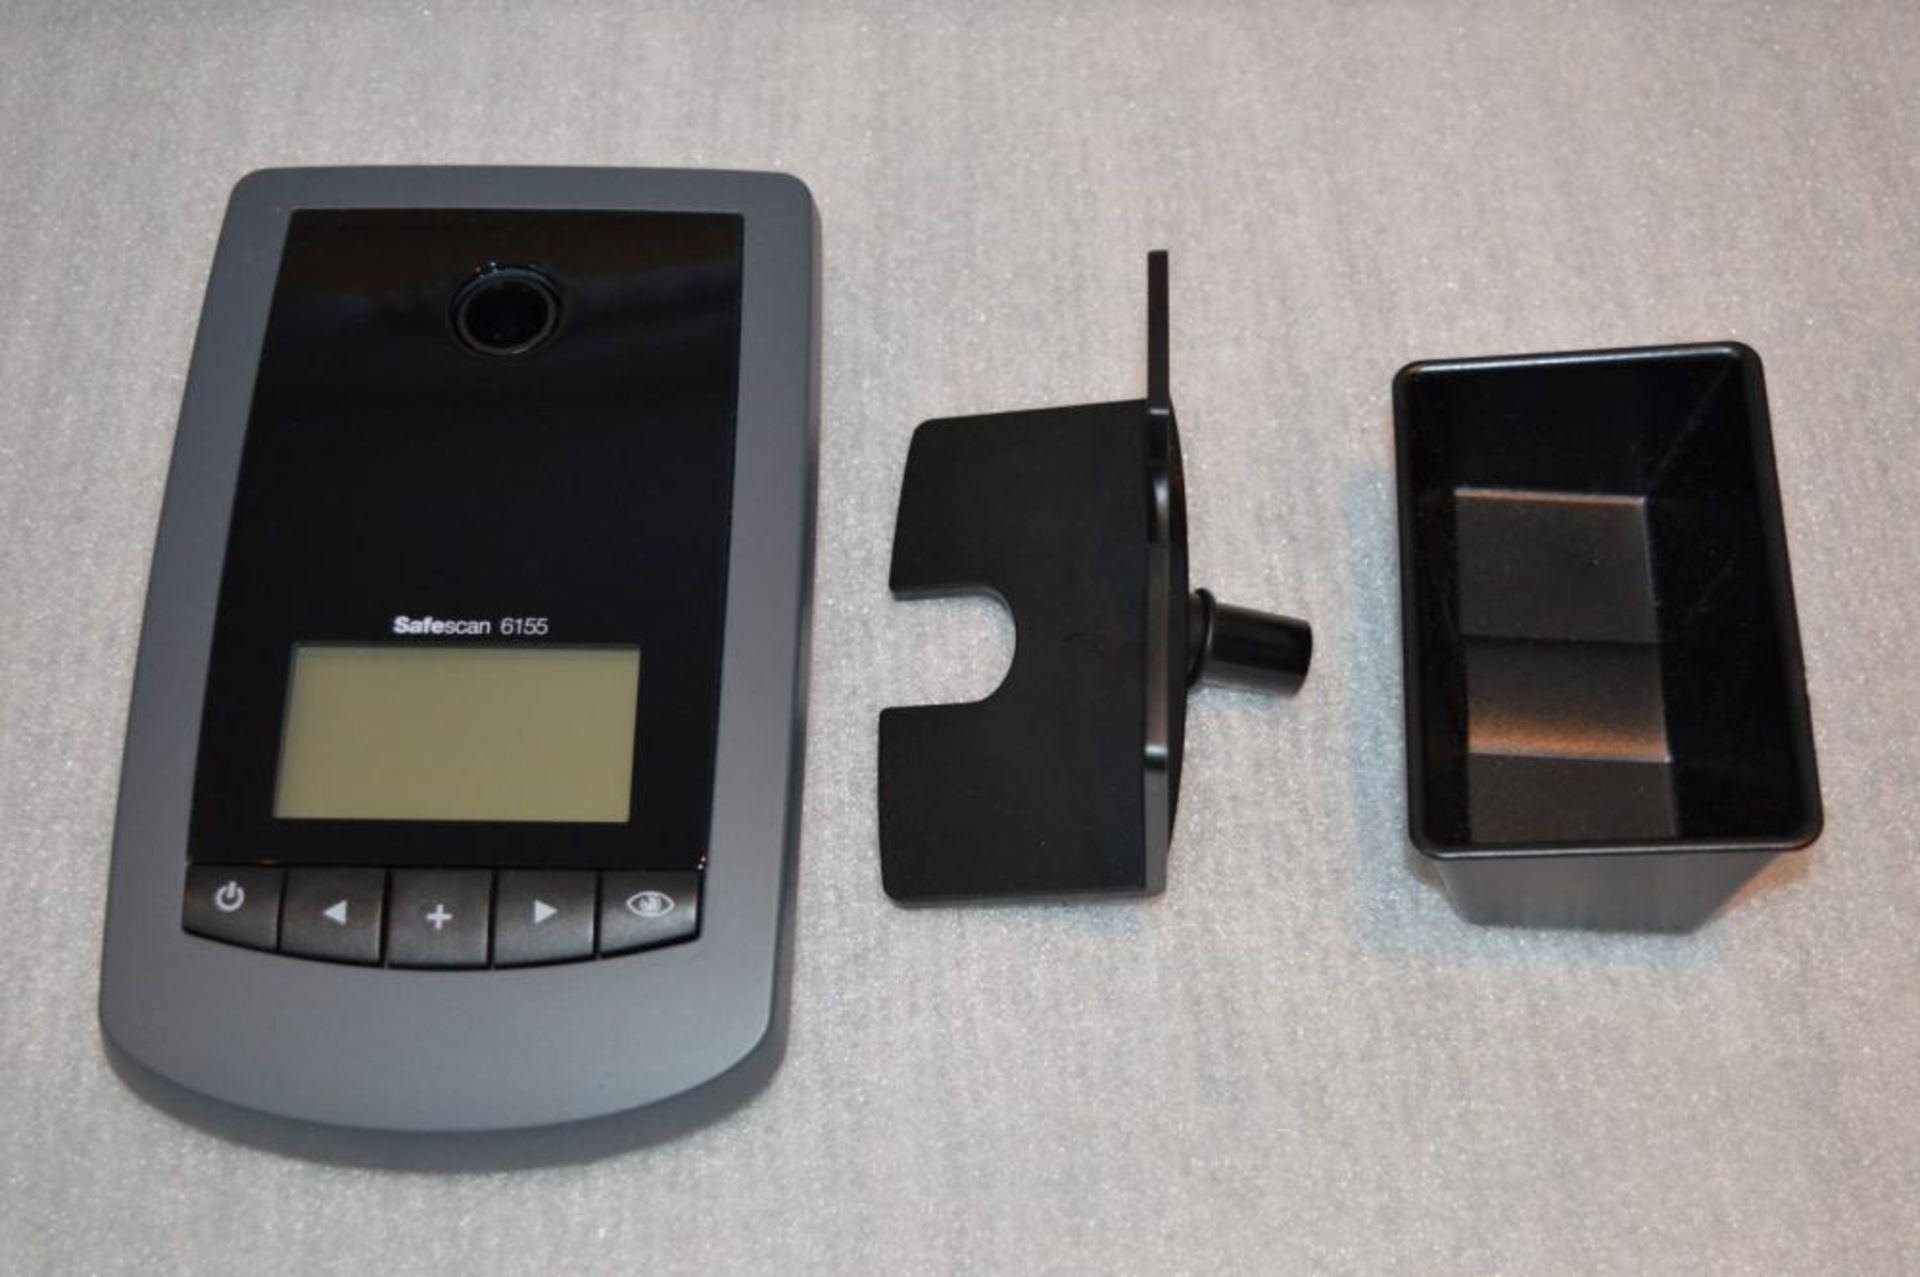 1 x SafeScan 6155 Coin and Bank Note Counter - Includes Coin and Note Trays, Box, Instructions and - Image 6 of 10